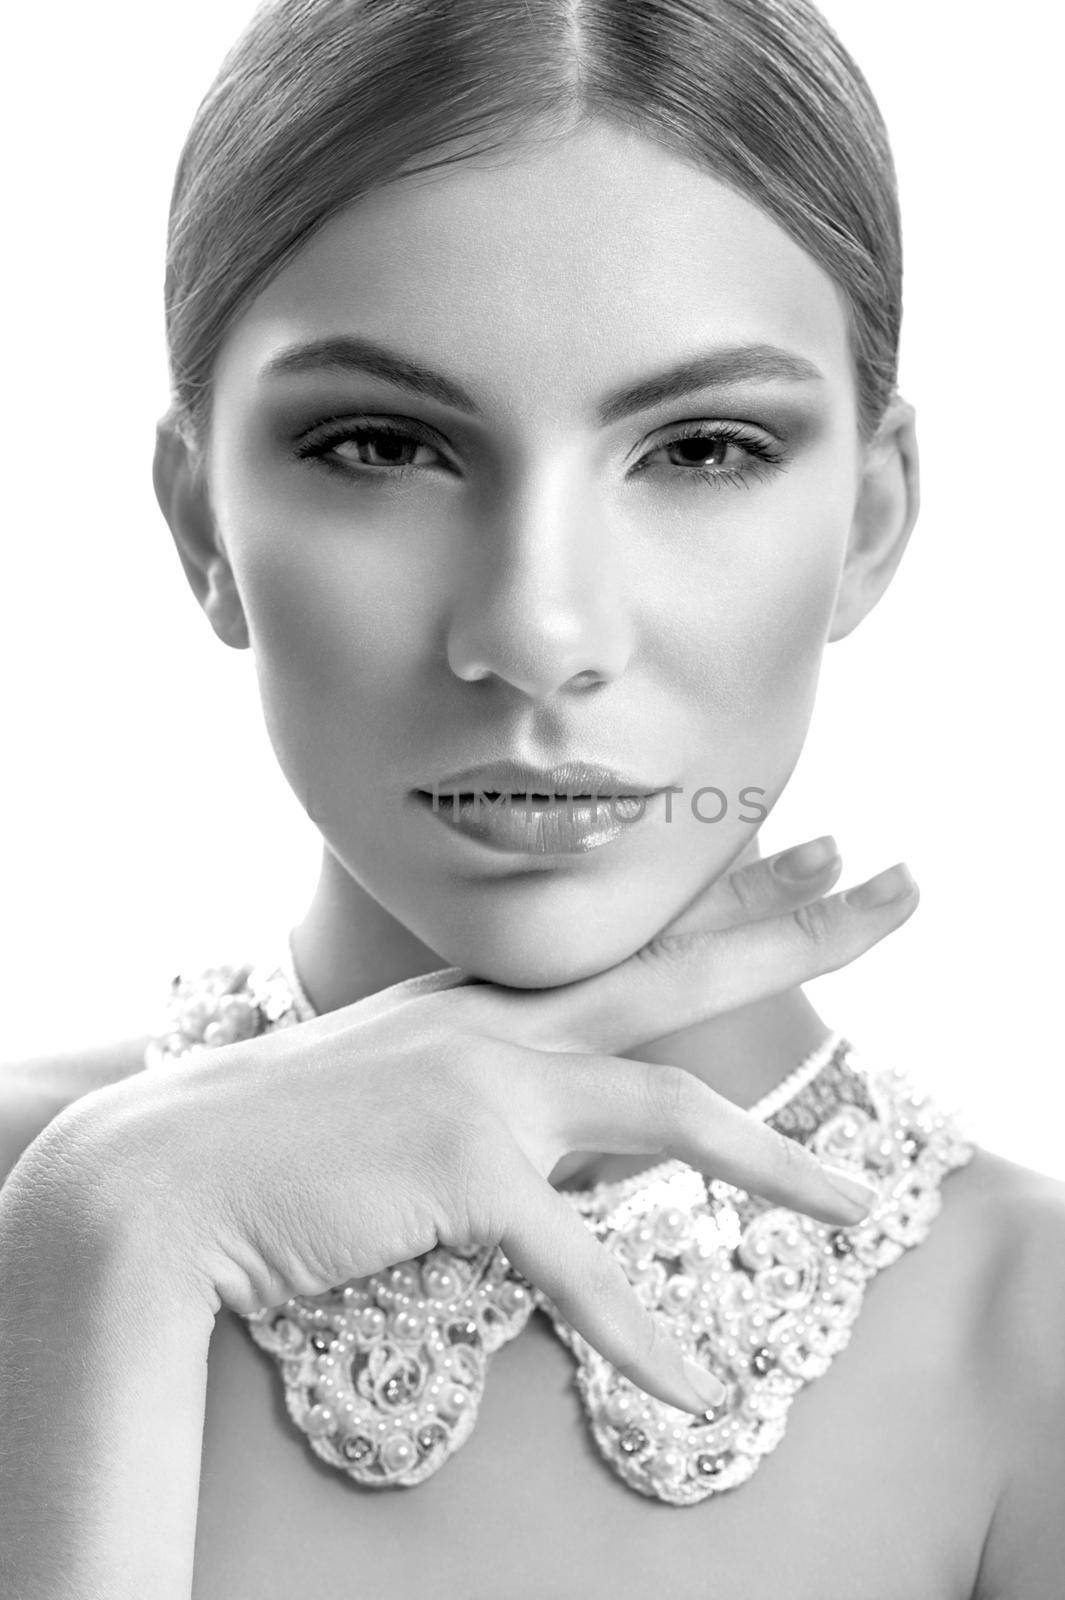 Old fashioned beauty. Monochrome vertical close up portrait of a gorgeous sexy young woman posing confidently with her hand to her chin wearing lacey collar necklace chin fashion style concept